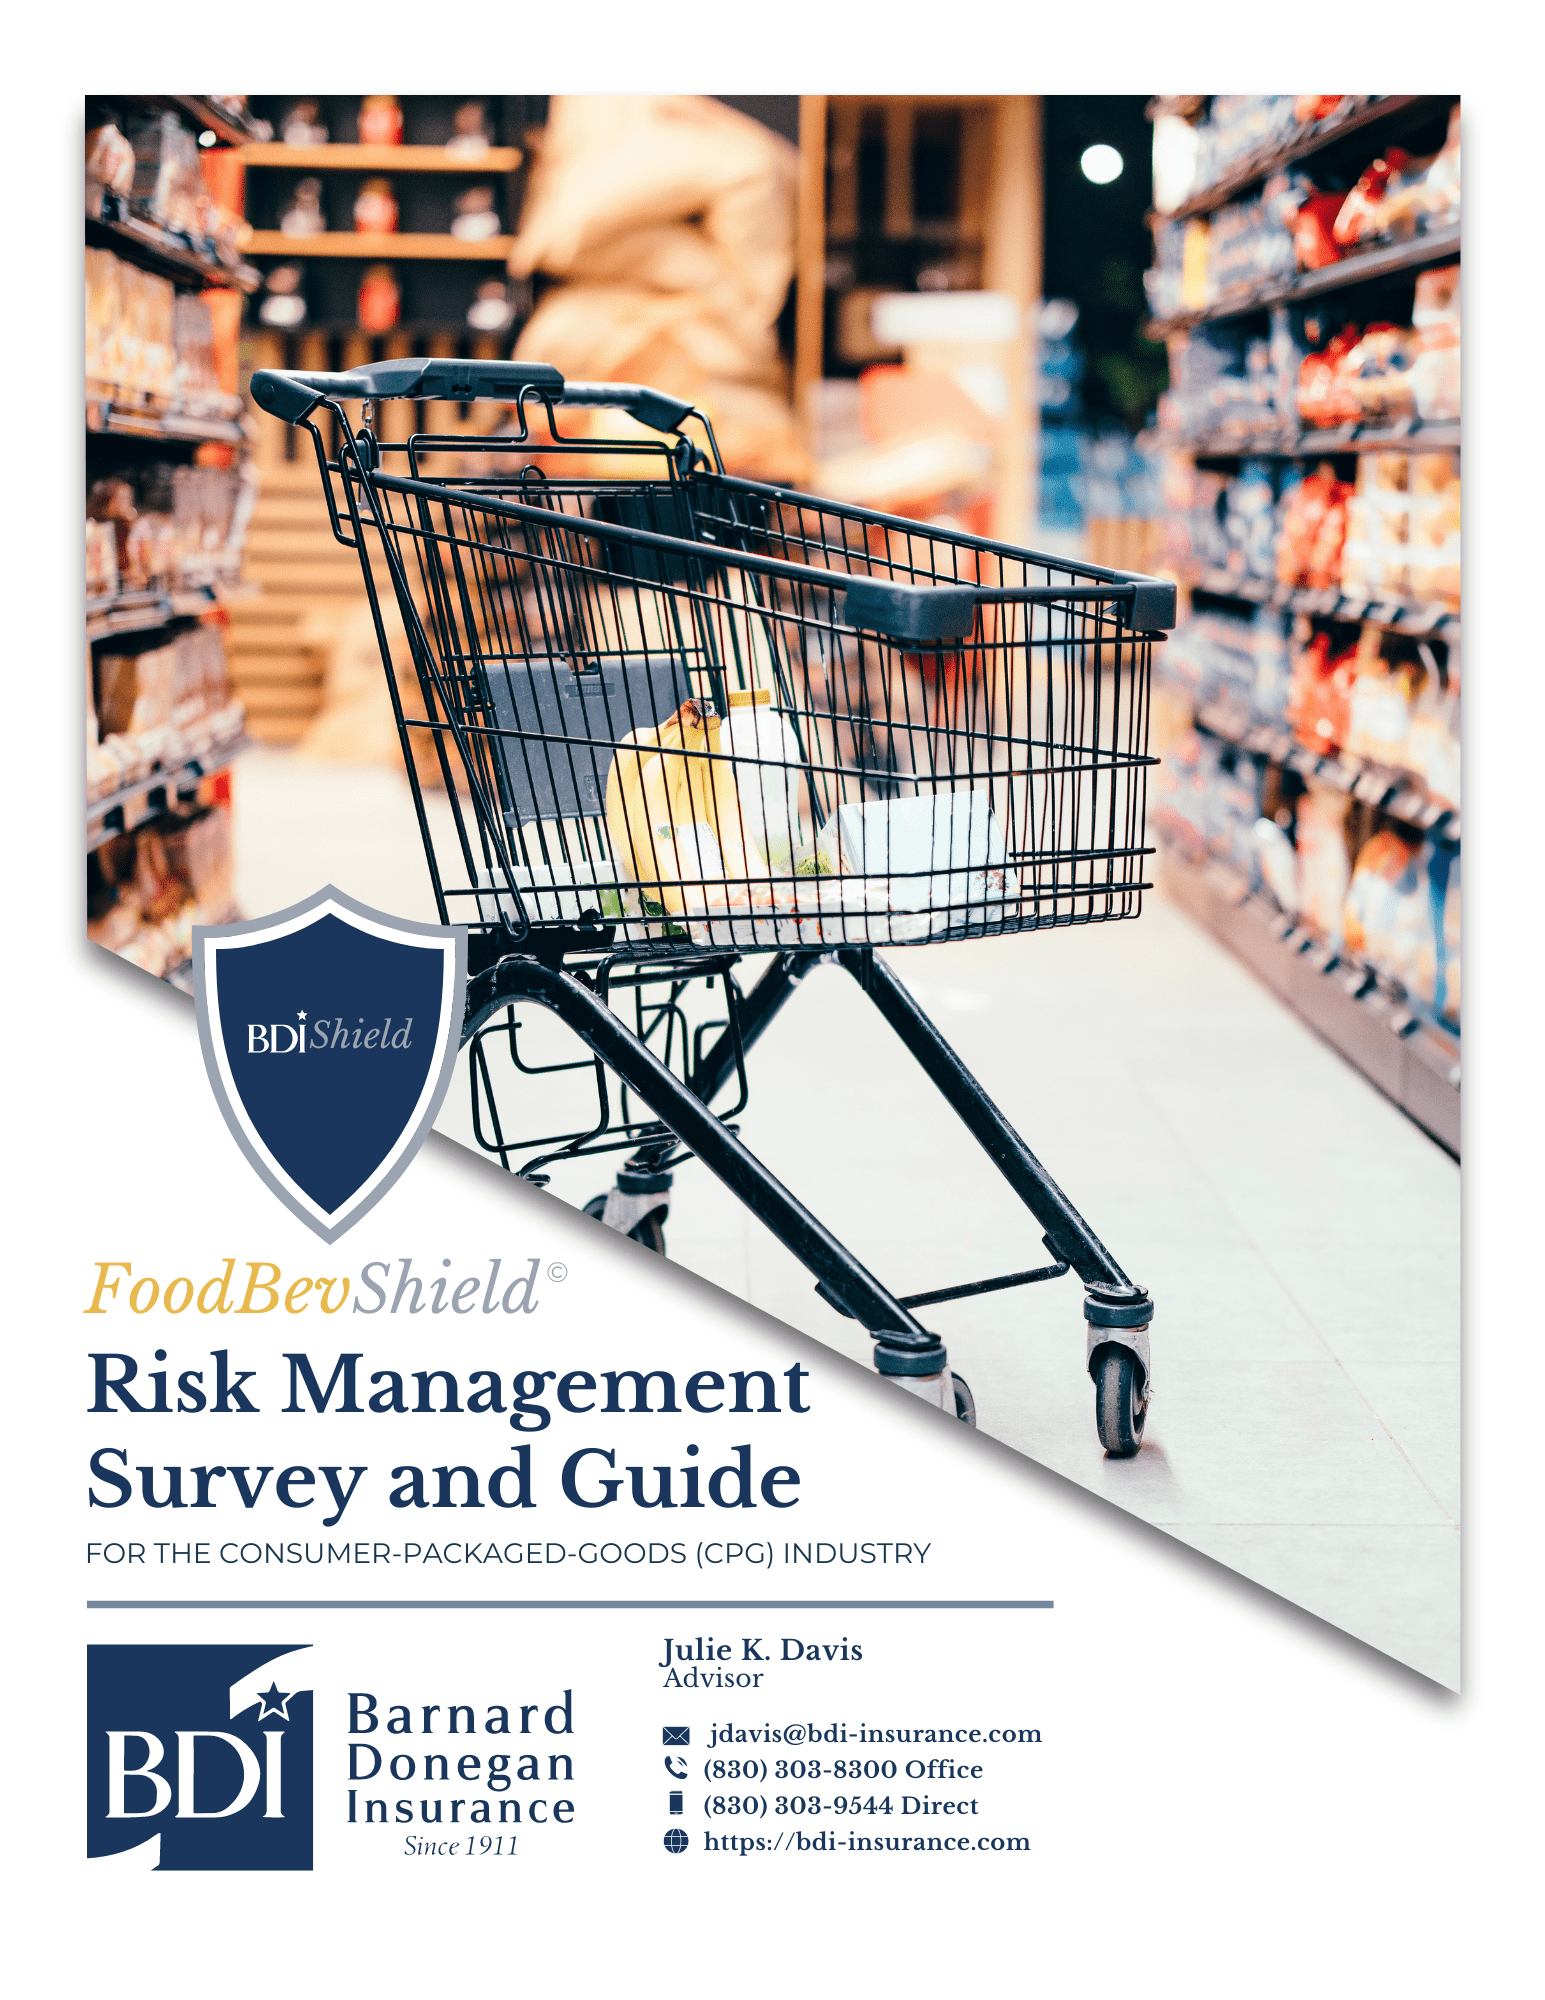 Cover of Risk Management Survey and Guide for CPG